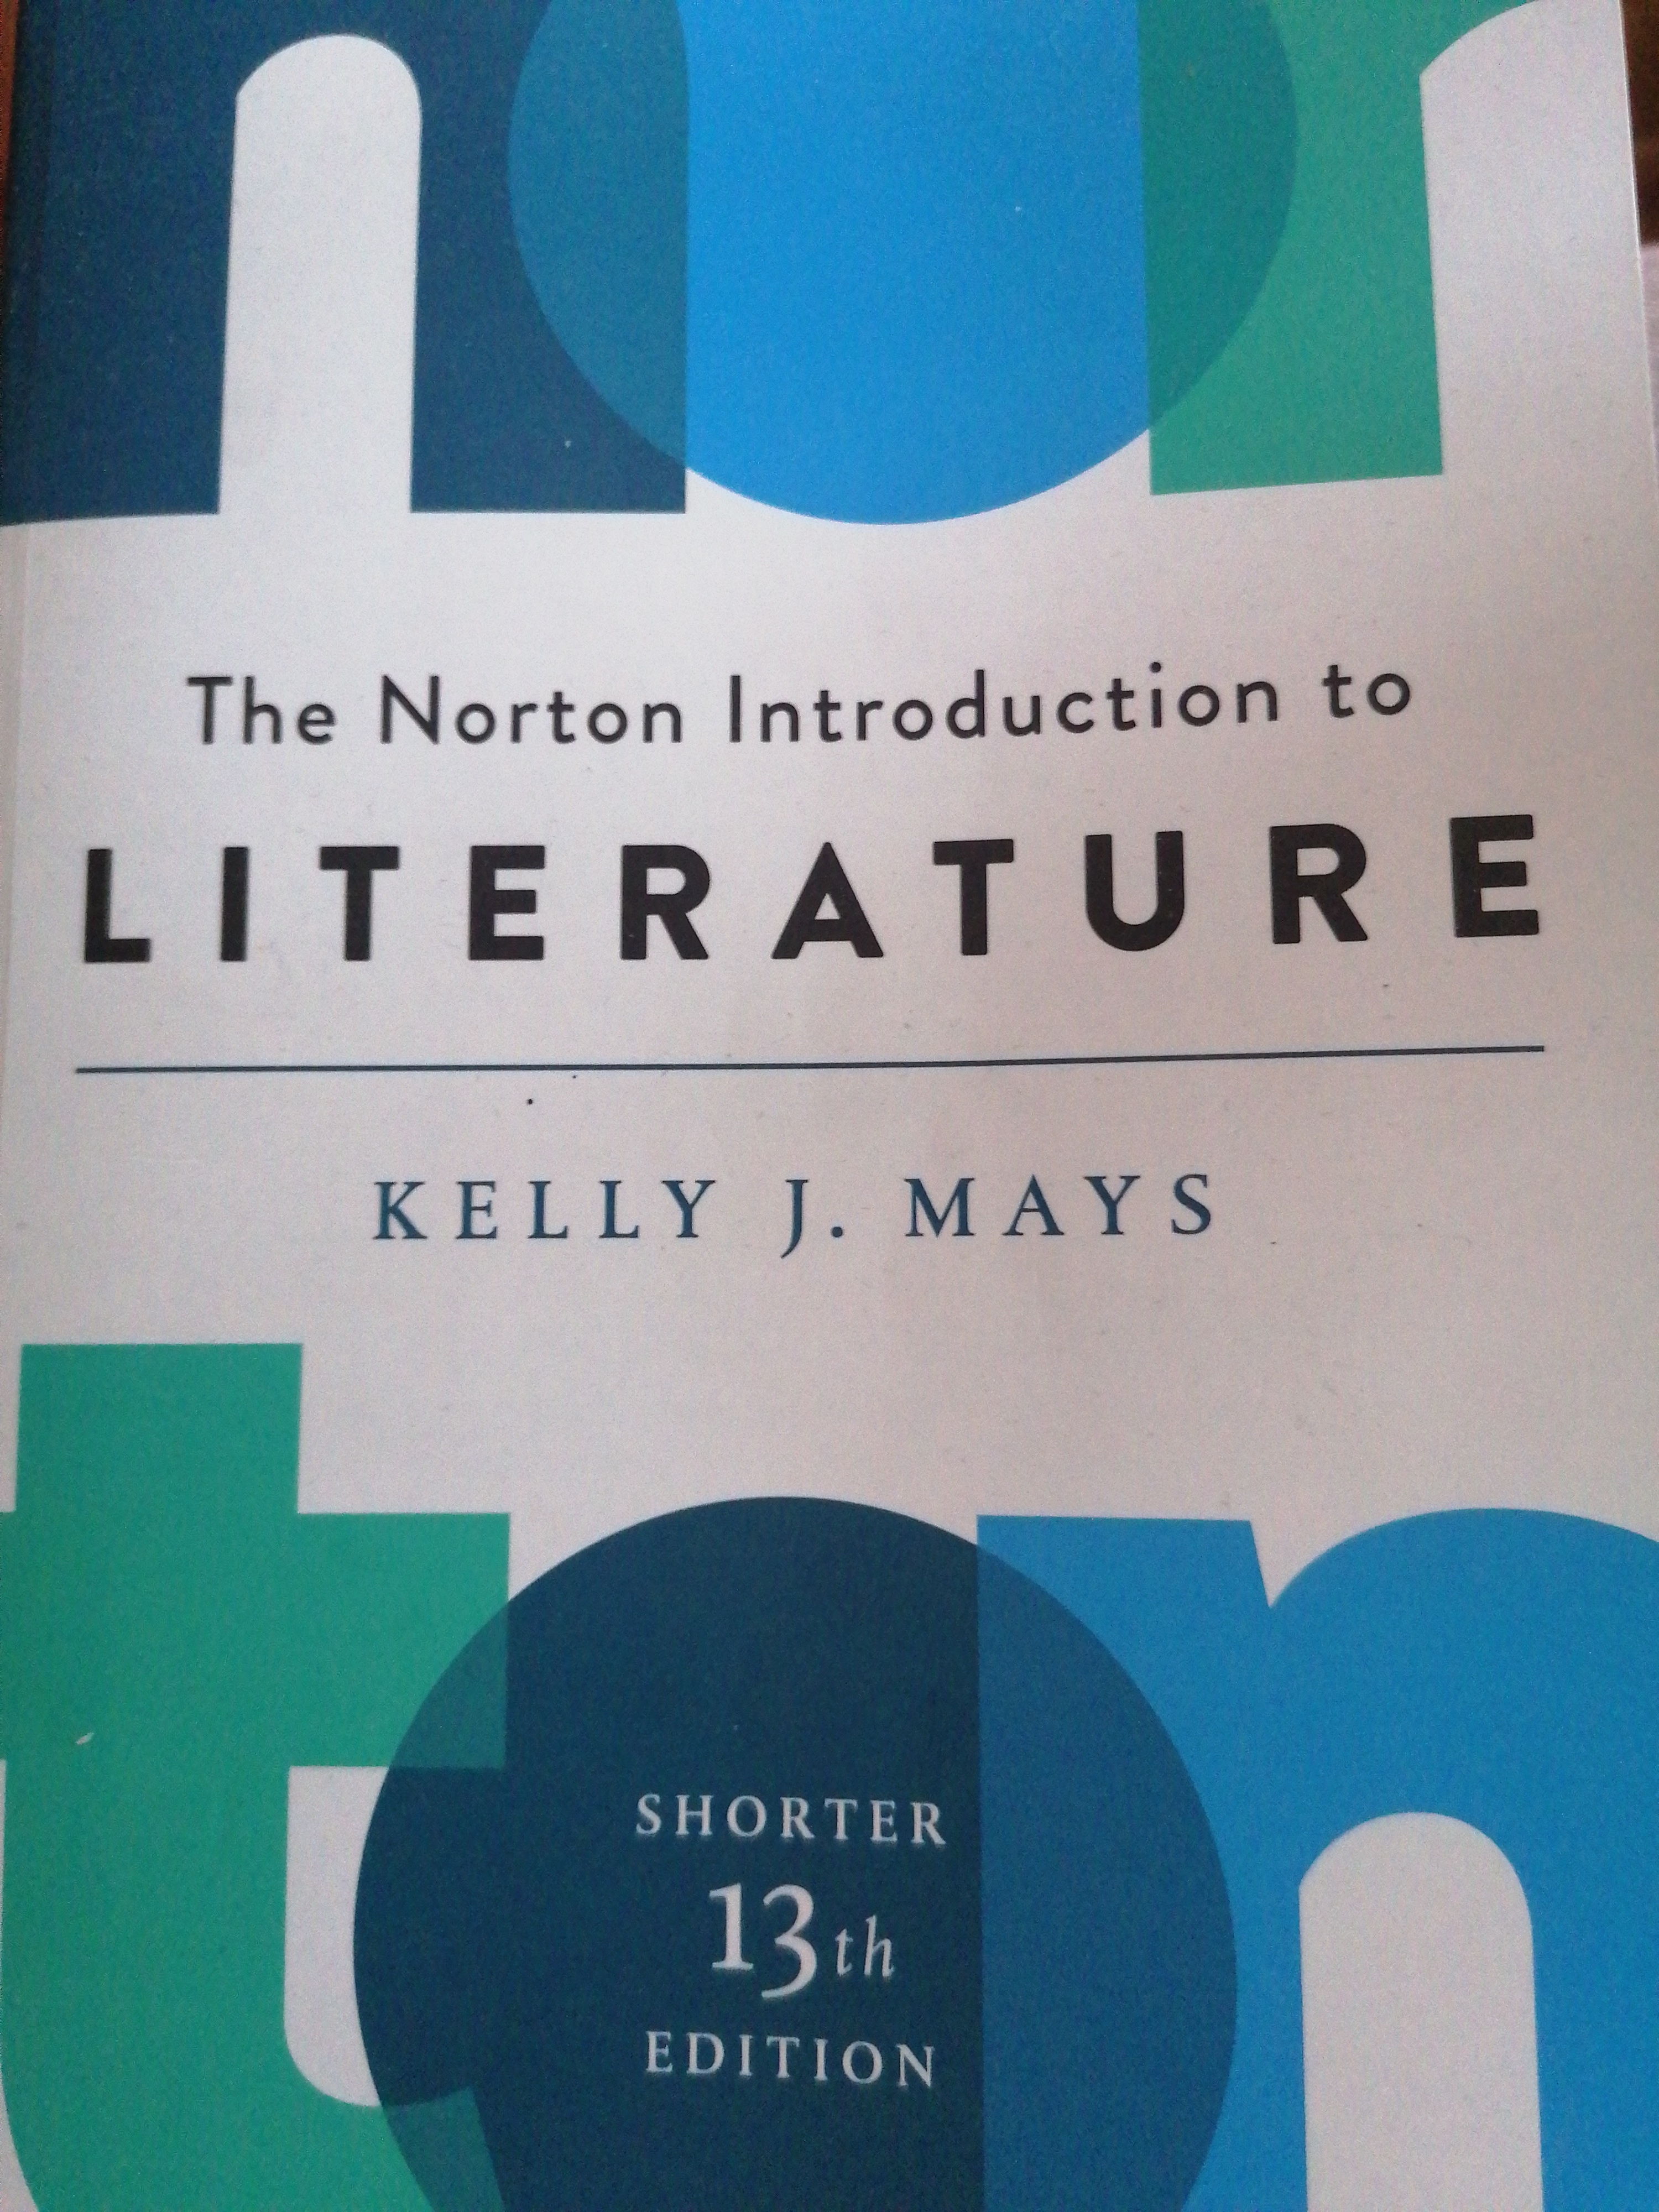 The Norton Introduction to Literature; Kelly J. Mays; 2019